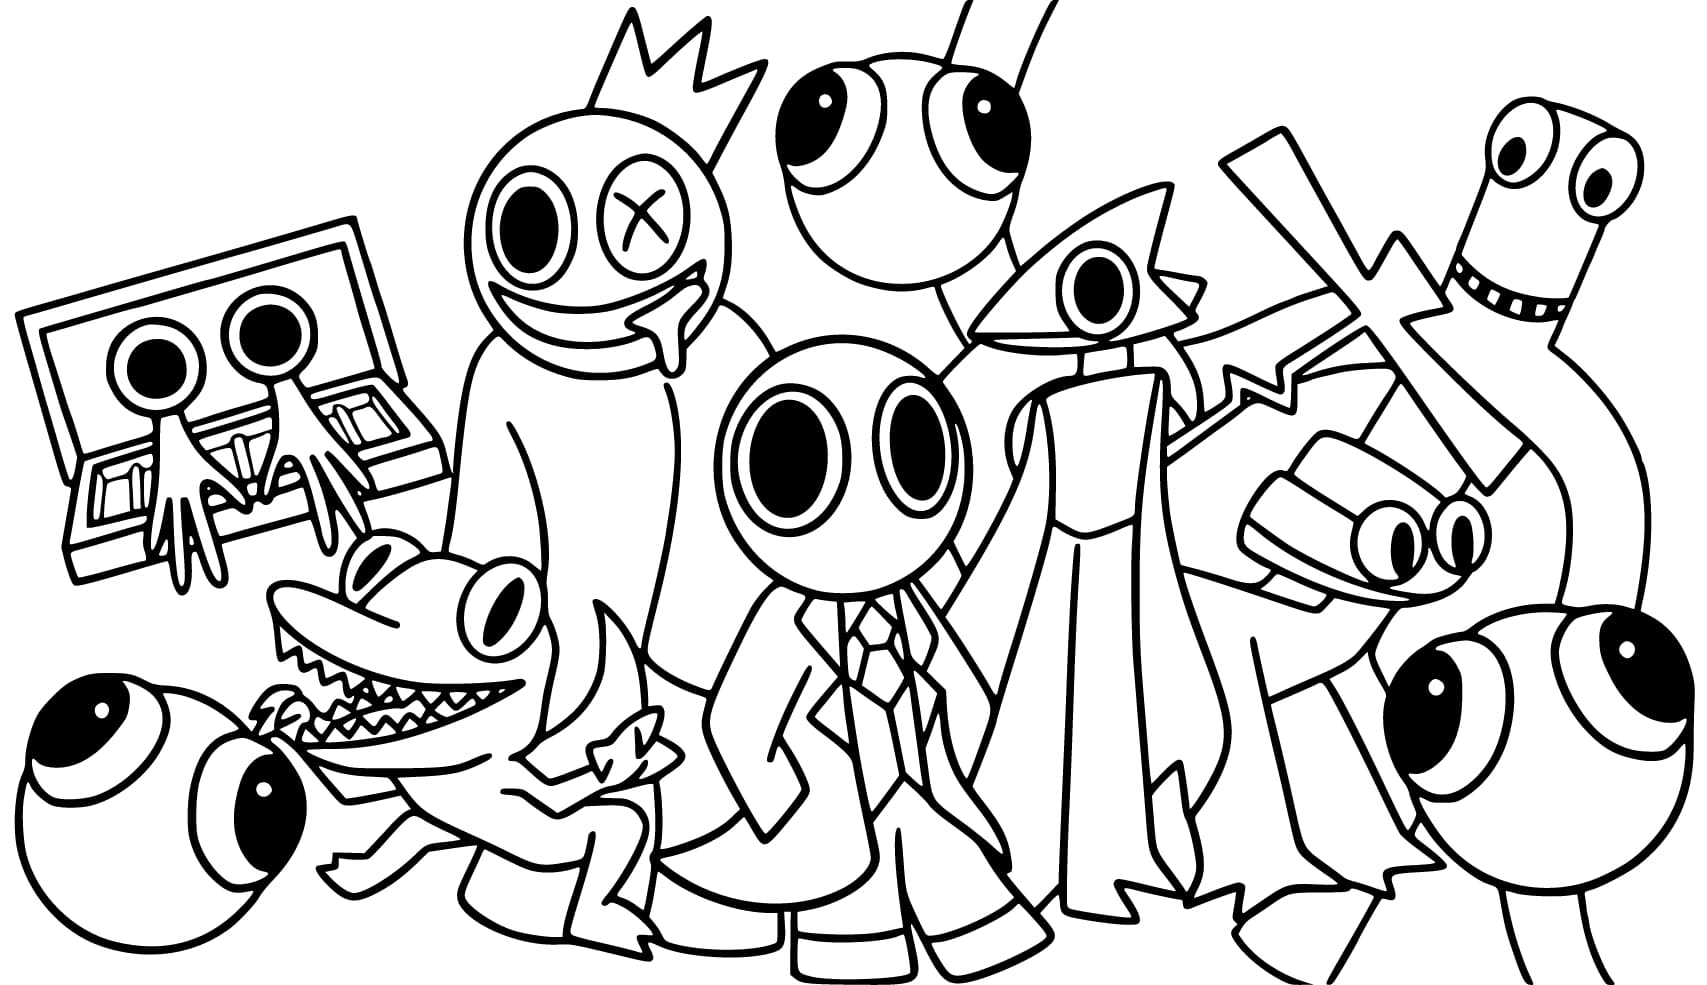 Red Rainbow Friends coloring pages – Art Art